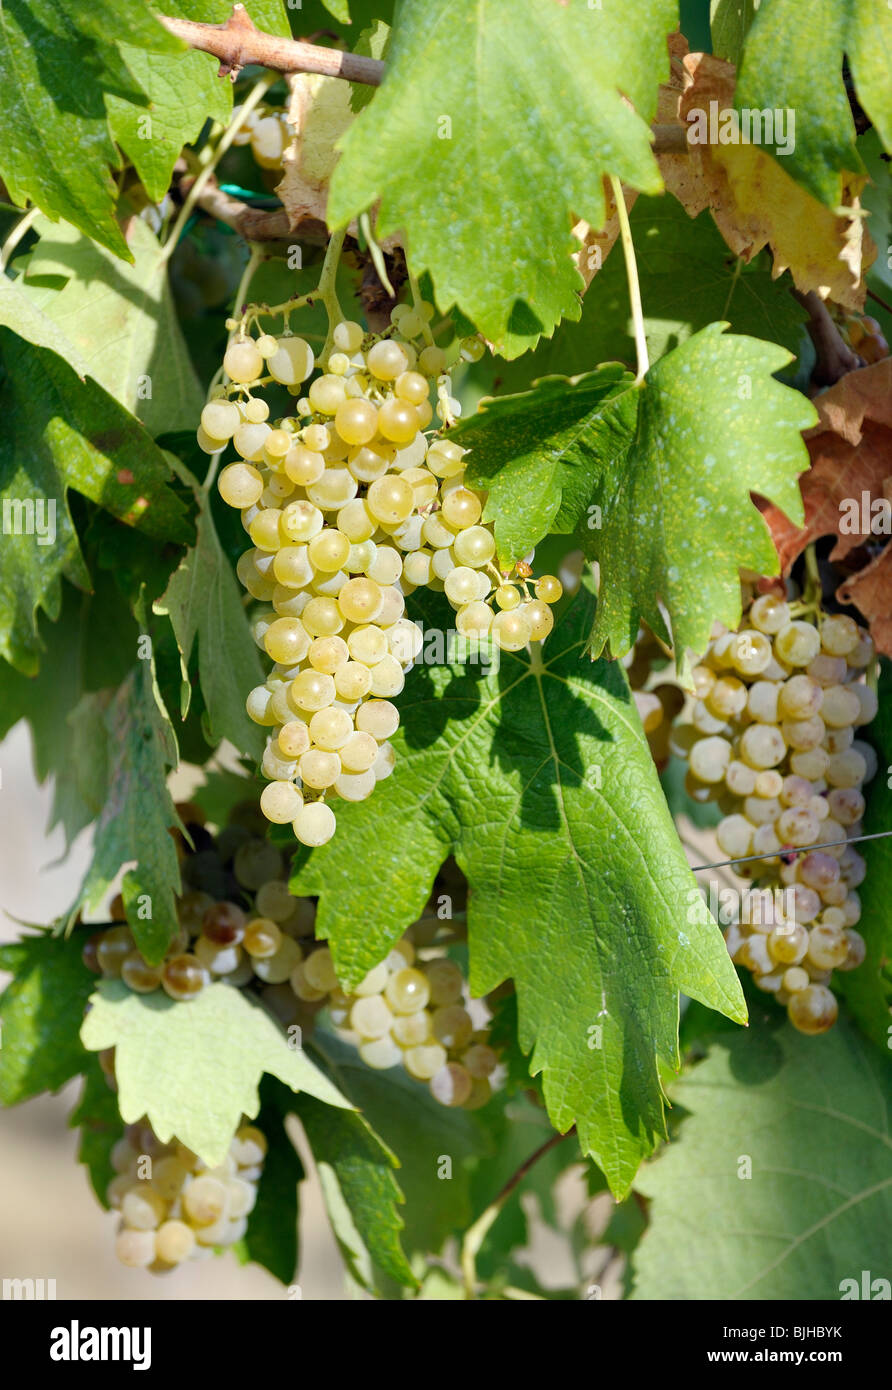 San Gimignano, Tuscany, Italy. Vine clusters of typical local white wine Vernaccia grapes Stock Photo